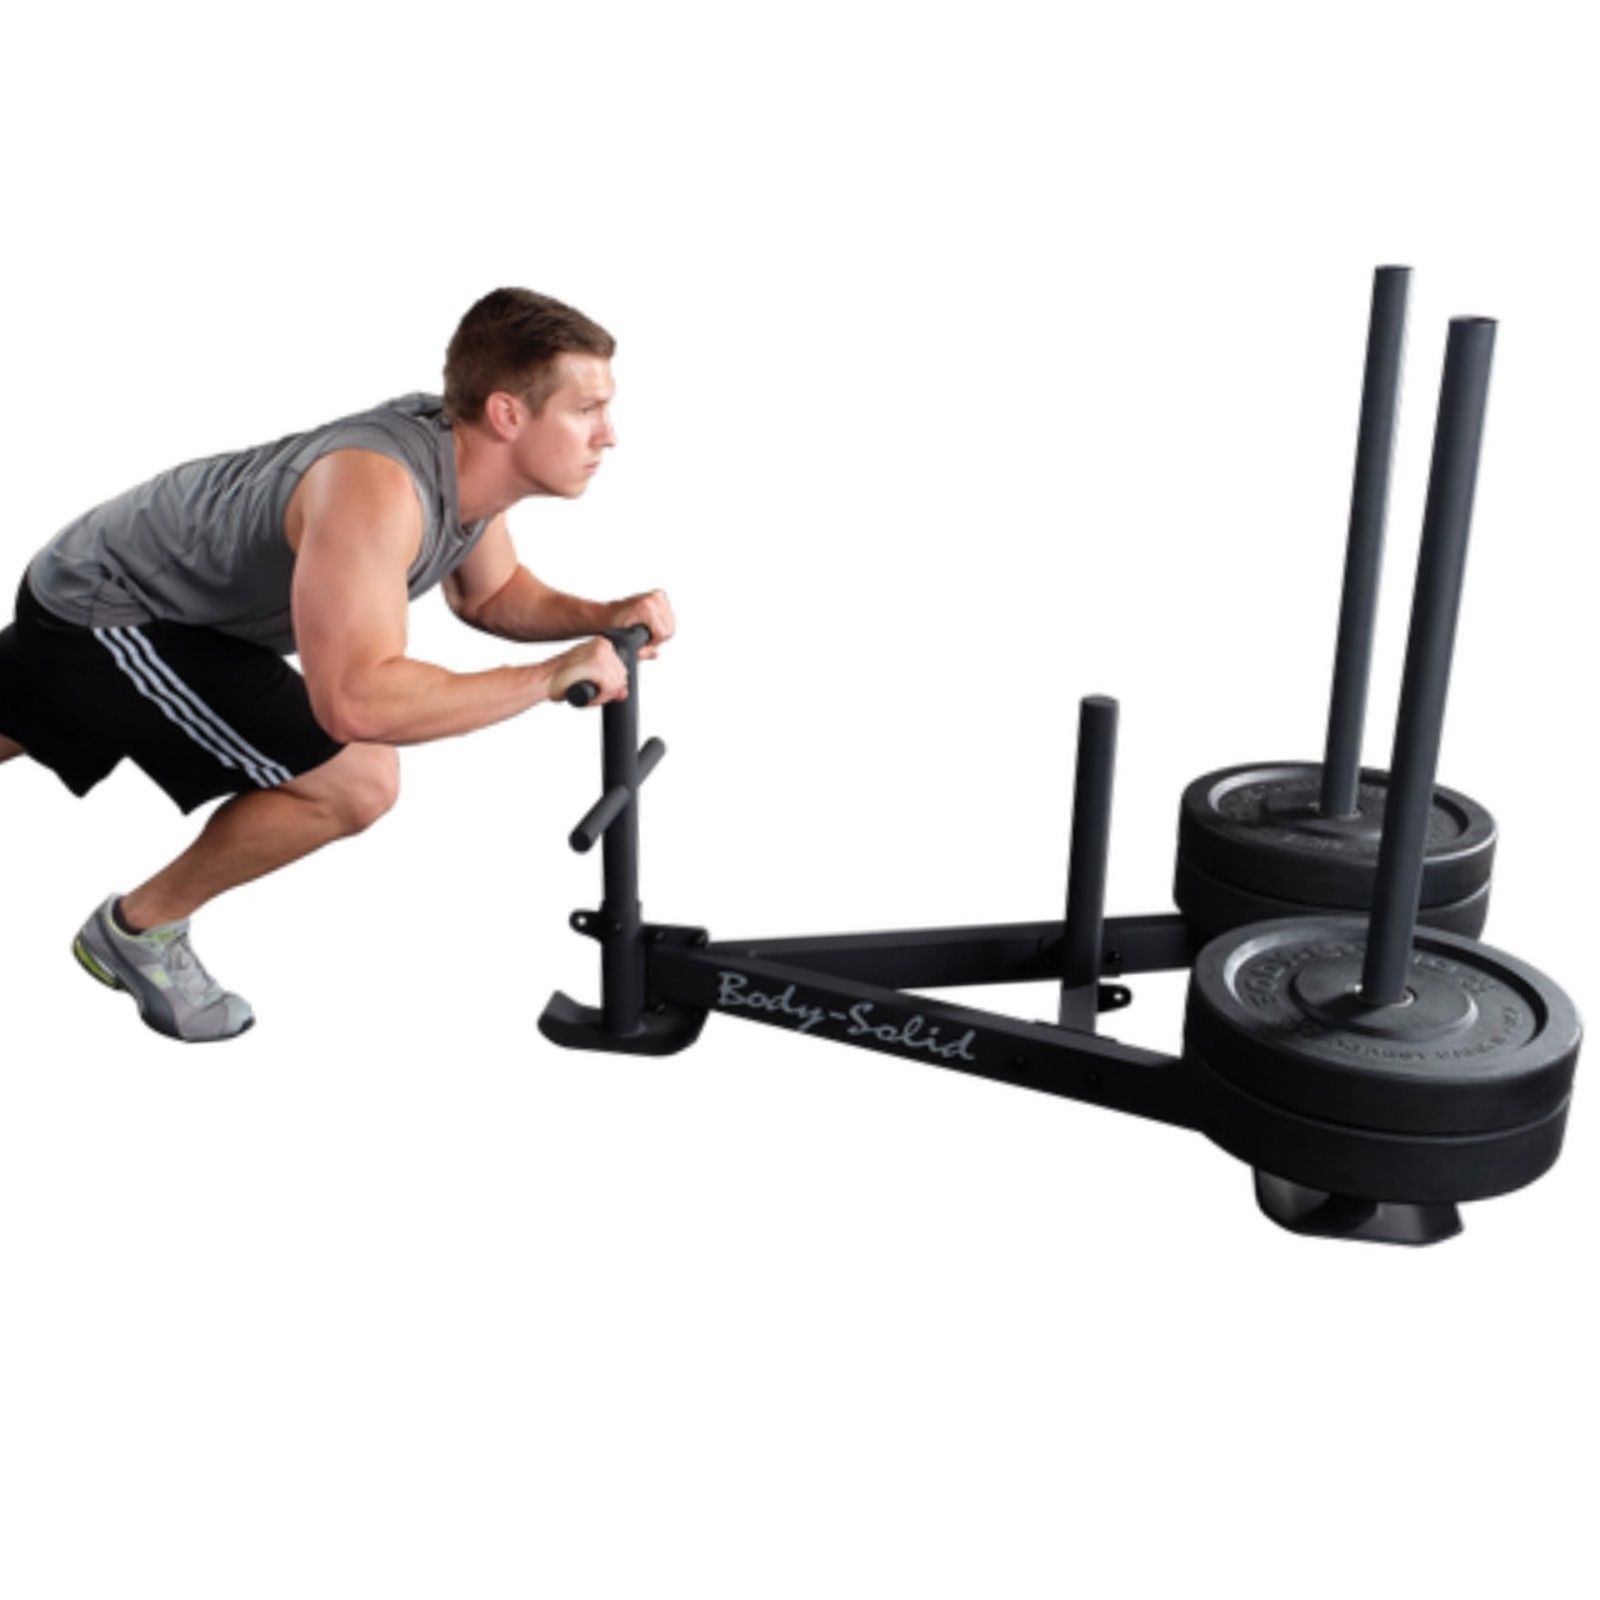 Body-Solid Weight Sled - GWS100 Push/Pull Commercial Sled Crossfit Training